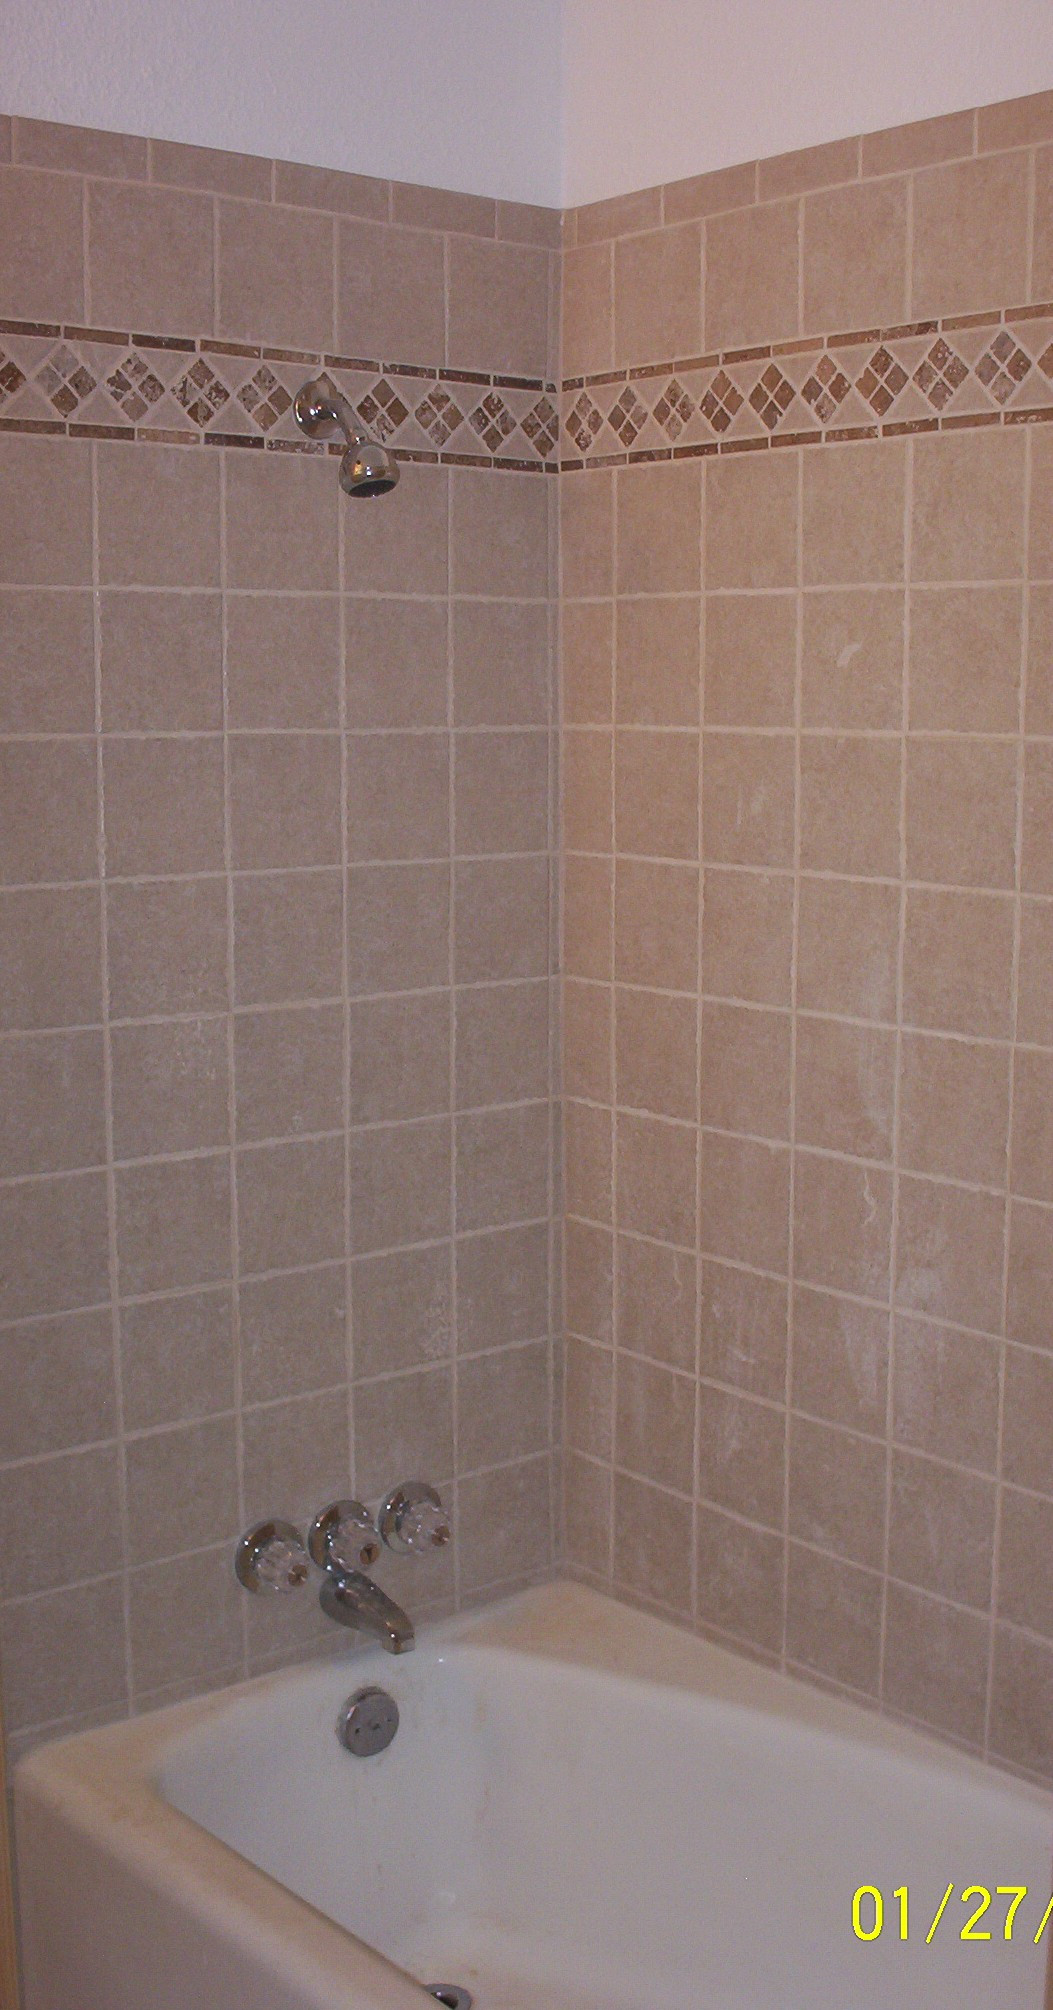 Tile Bathroom Showers
 How to Install a Polystyrene Shower Base